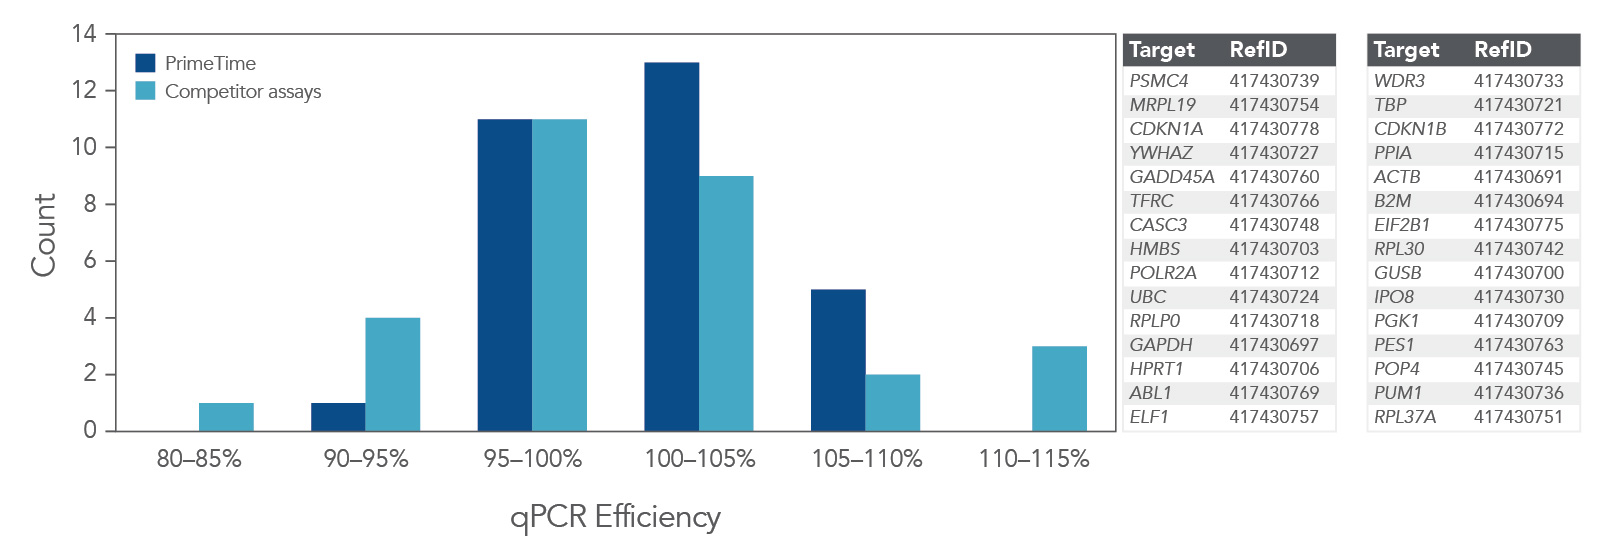 Analysis of qPCR efficiency for PrimeTime qPCR Assays compared to competitor.